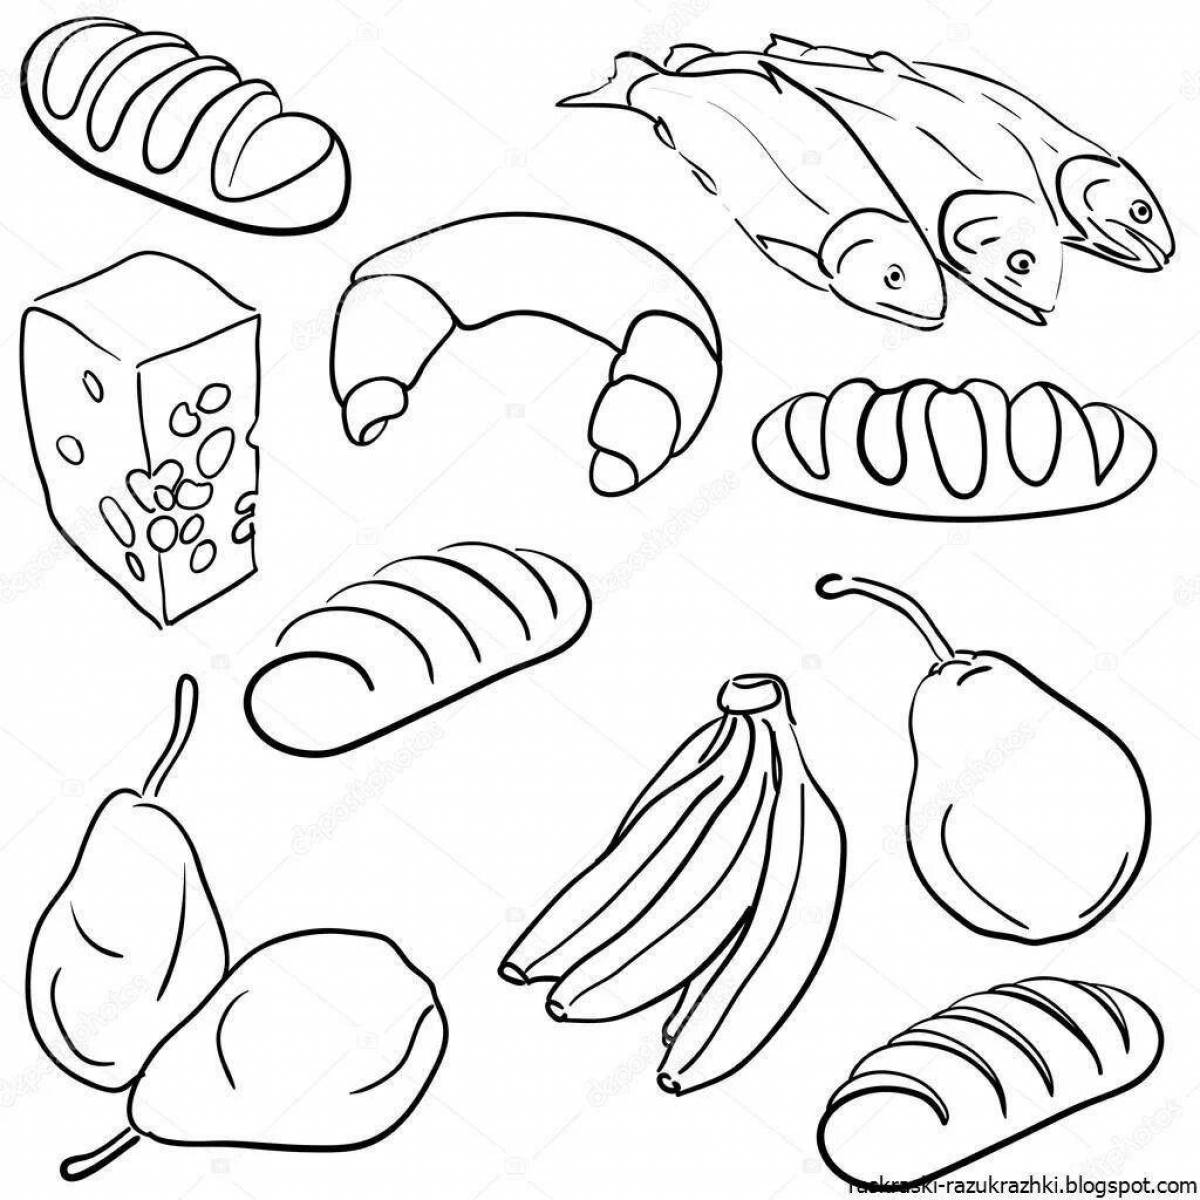 Fun foodstuffs coloring page for 6-7 year olds with logo